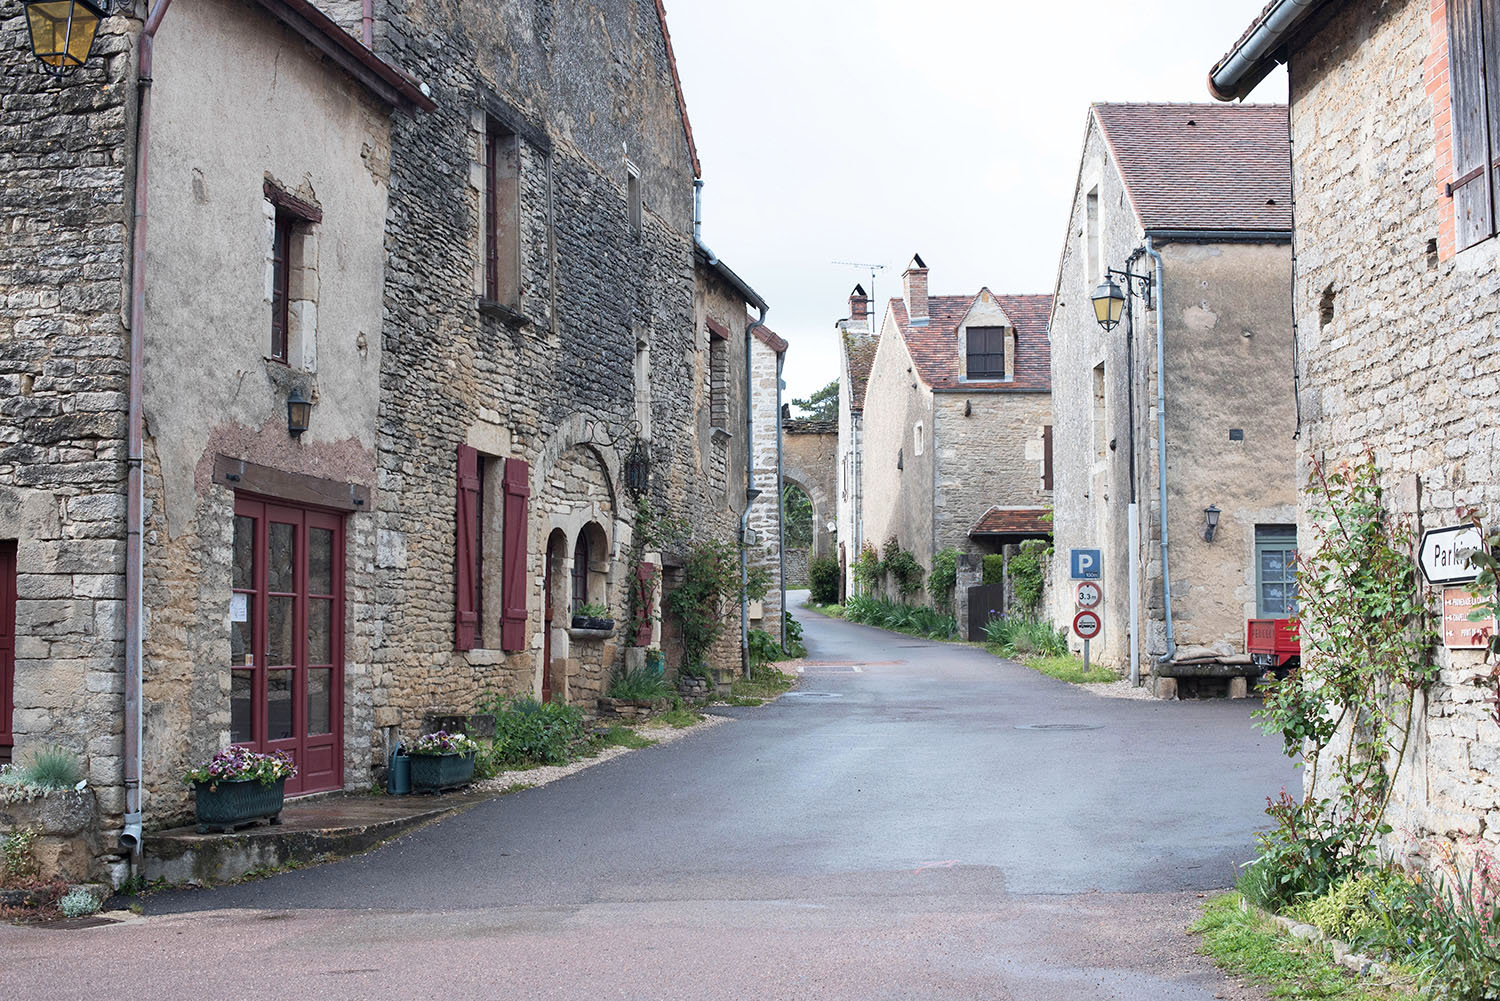 Stone houses in the town of Chateauneuf-en-Auxois in Burgundy, photographed by travel blogger Cee Fardoe of Coco & Vera